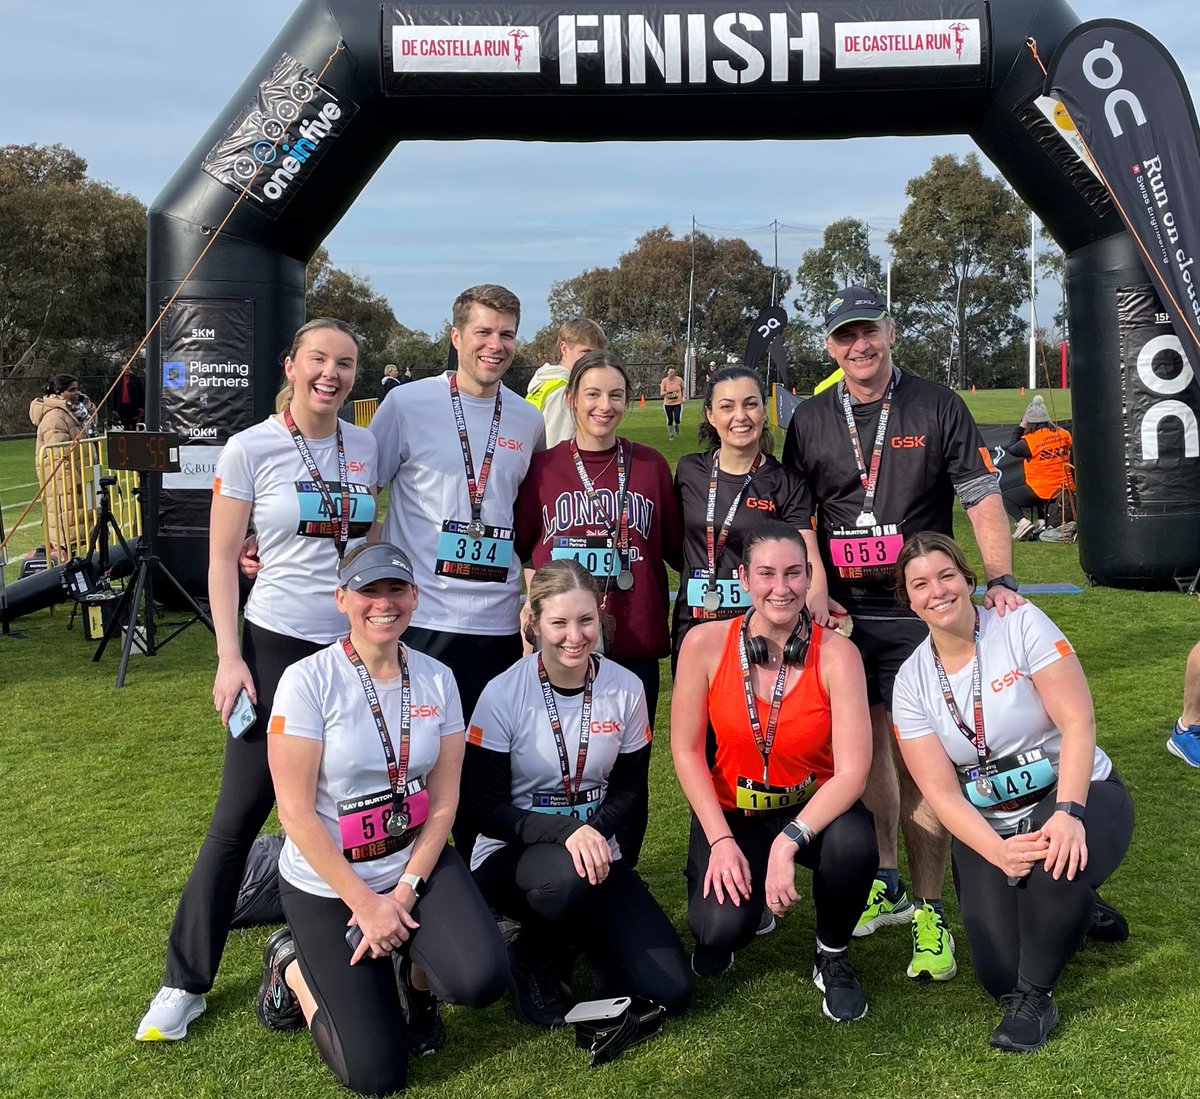 The #GSKAustralia team have completed the iconic @decastellarun!

On Sunday, the team ran for mental health and raised funds for three inspiring charities: @_ONEINFIVE_, @Gotcha_4_Life and @IndigMaraProjct.

To learn more, visit: bit.ly/3XCkr8L